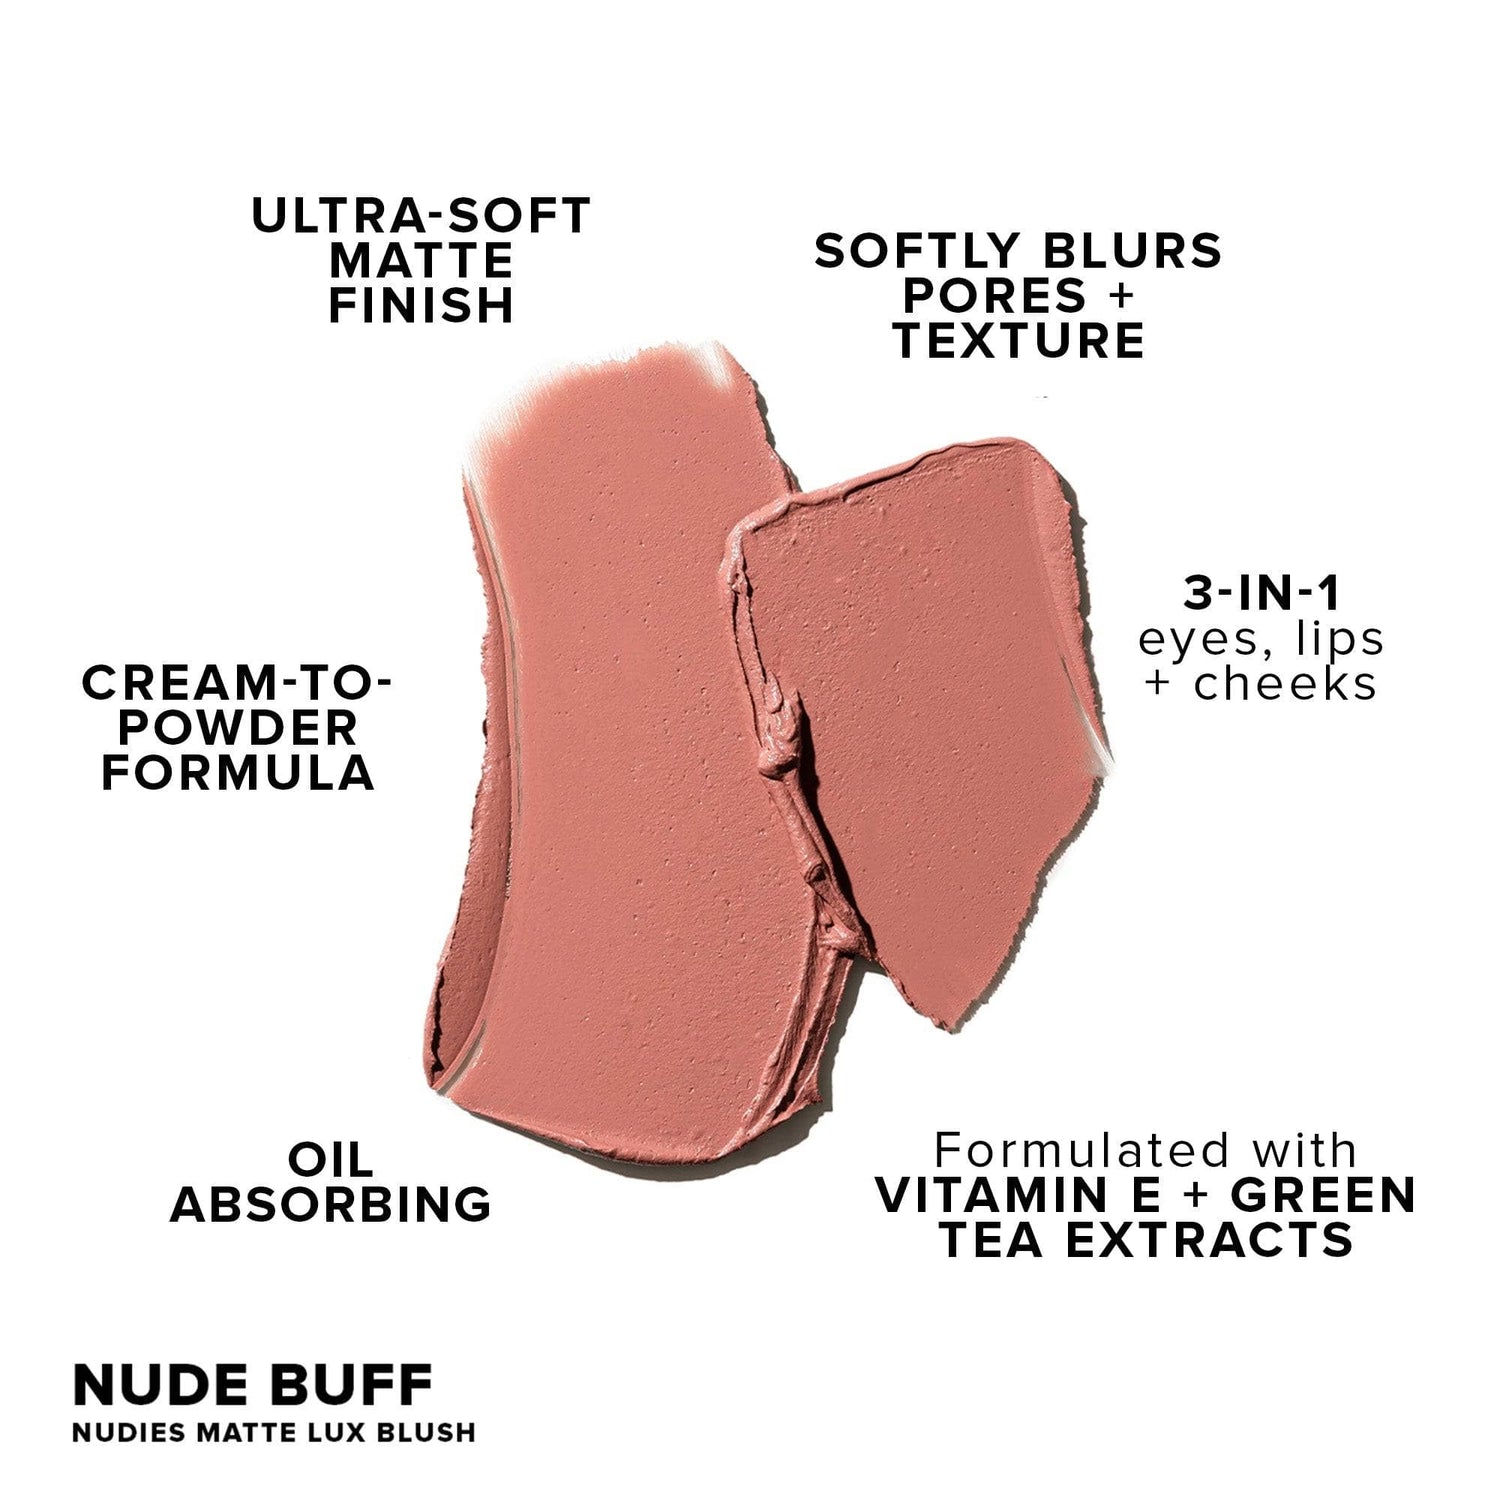 Nudies Matte Lux Nude Buff のテクスチャ見本と成分の説明